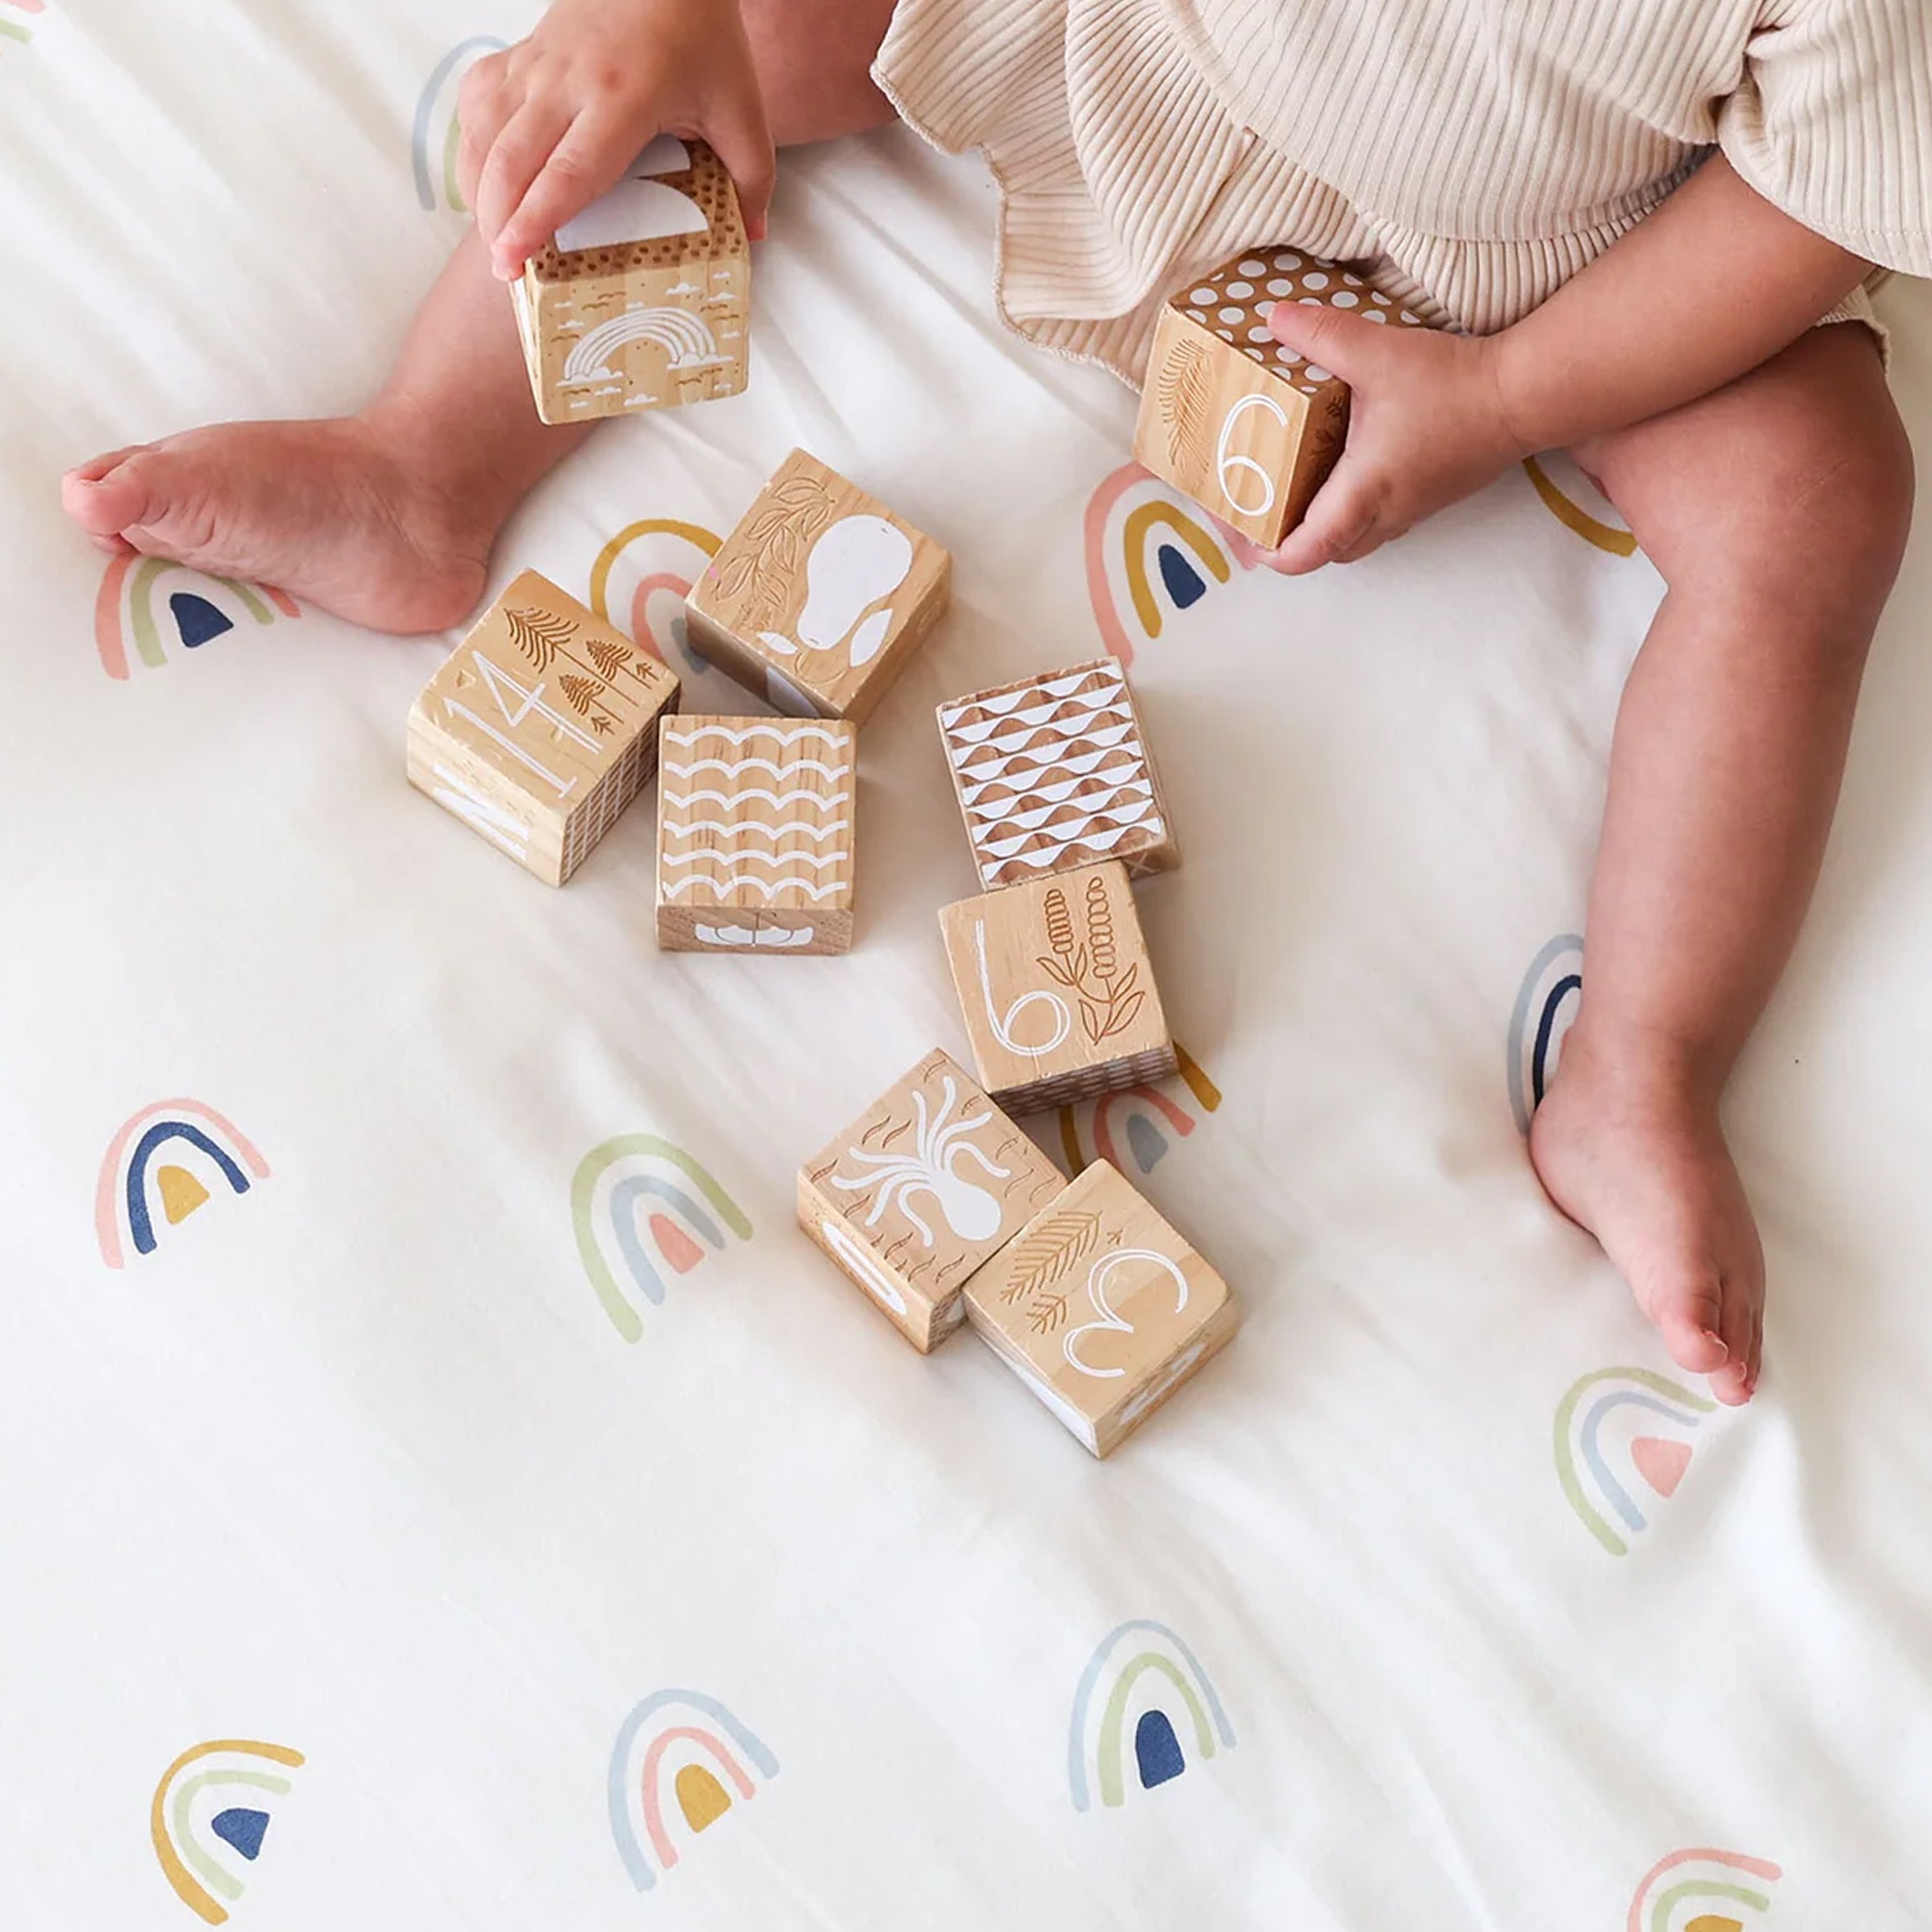 A toddler sits on a white Makemake Organics Mini Crib Fitted Sheet Set- Dotty & Rainbow with rainbow patterns, playing with wooden blocks featuring various carved designs. some blocks are scattered around the child.